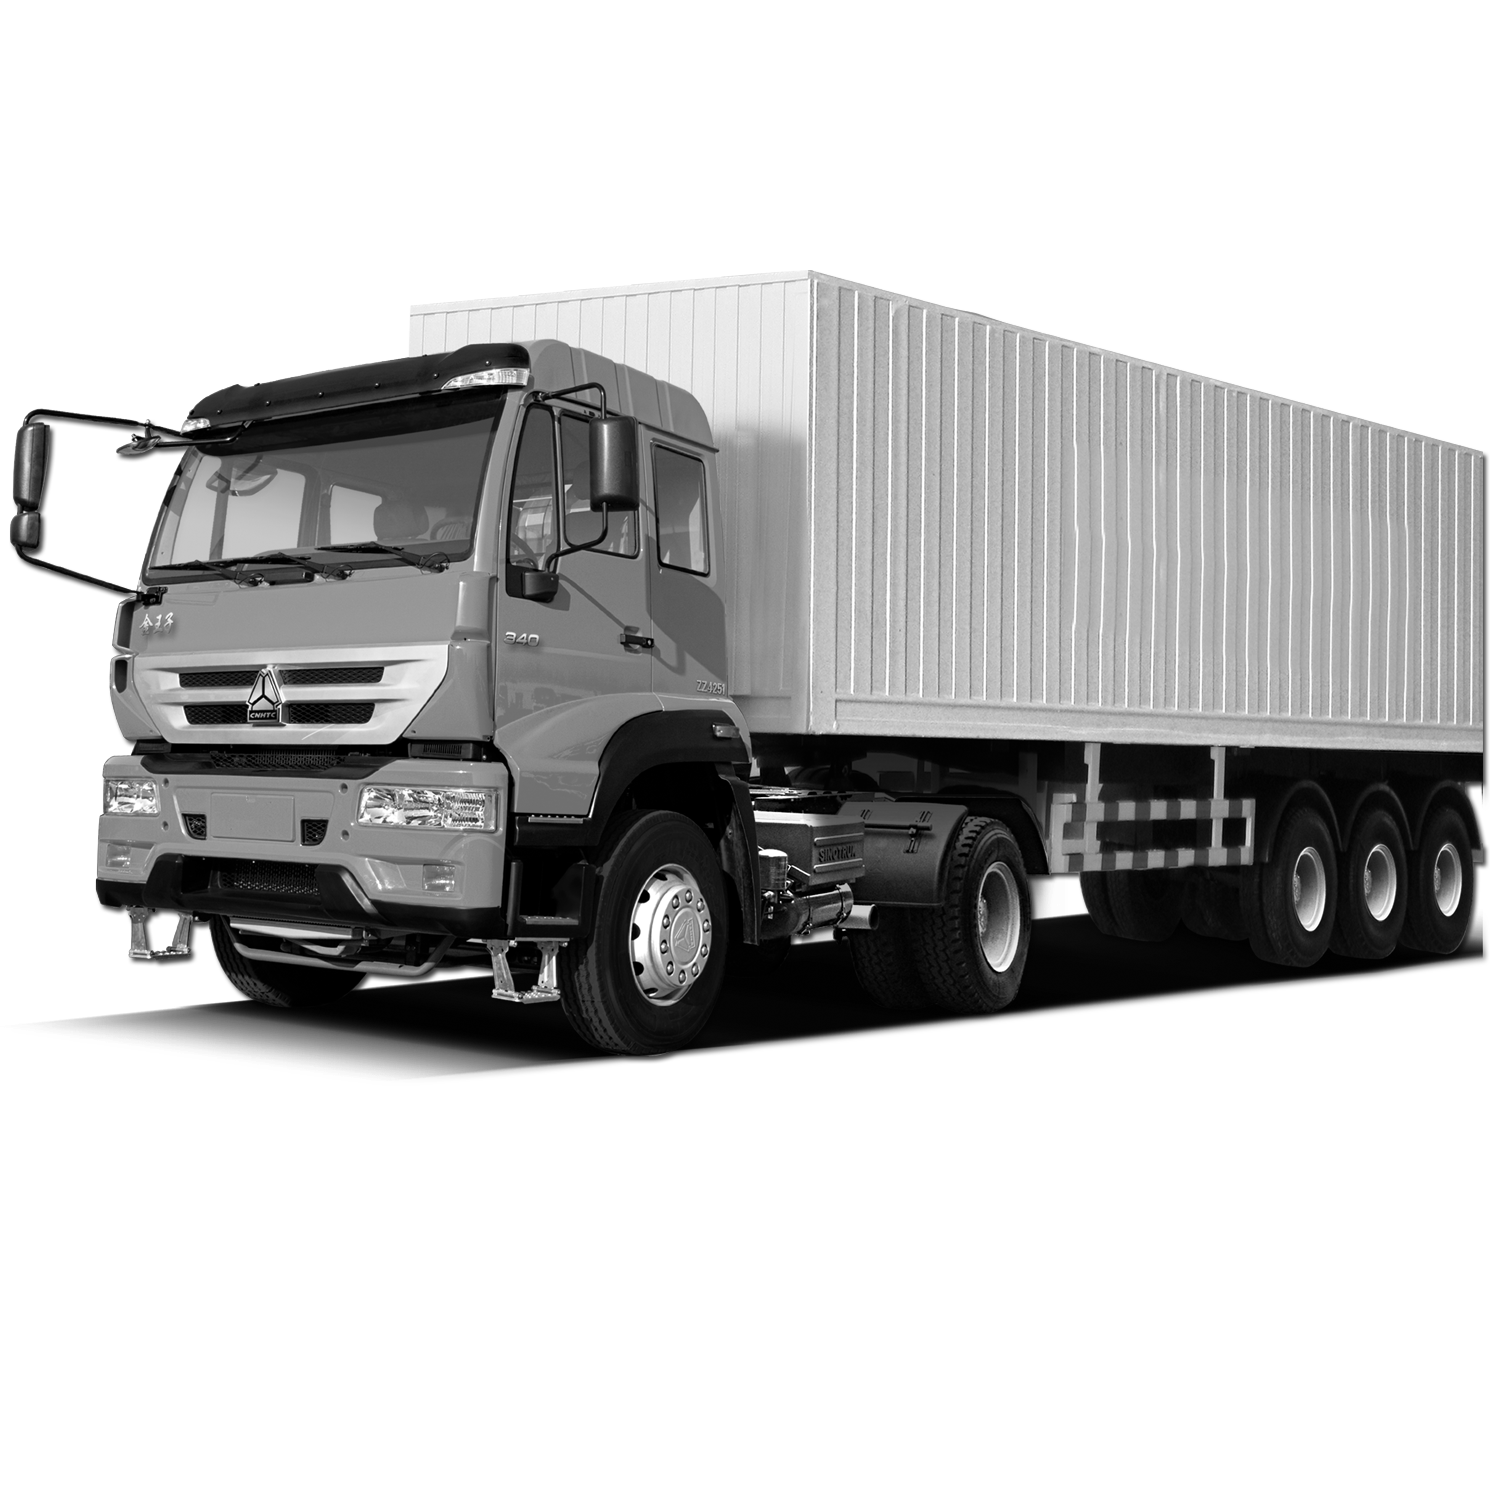 kisspng-car-van-china-national-heavy-duty-truck-group-vehi-freight-truck-5a994bdcce7284